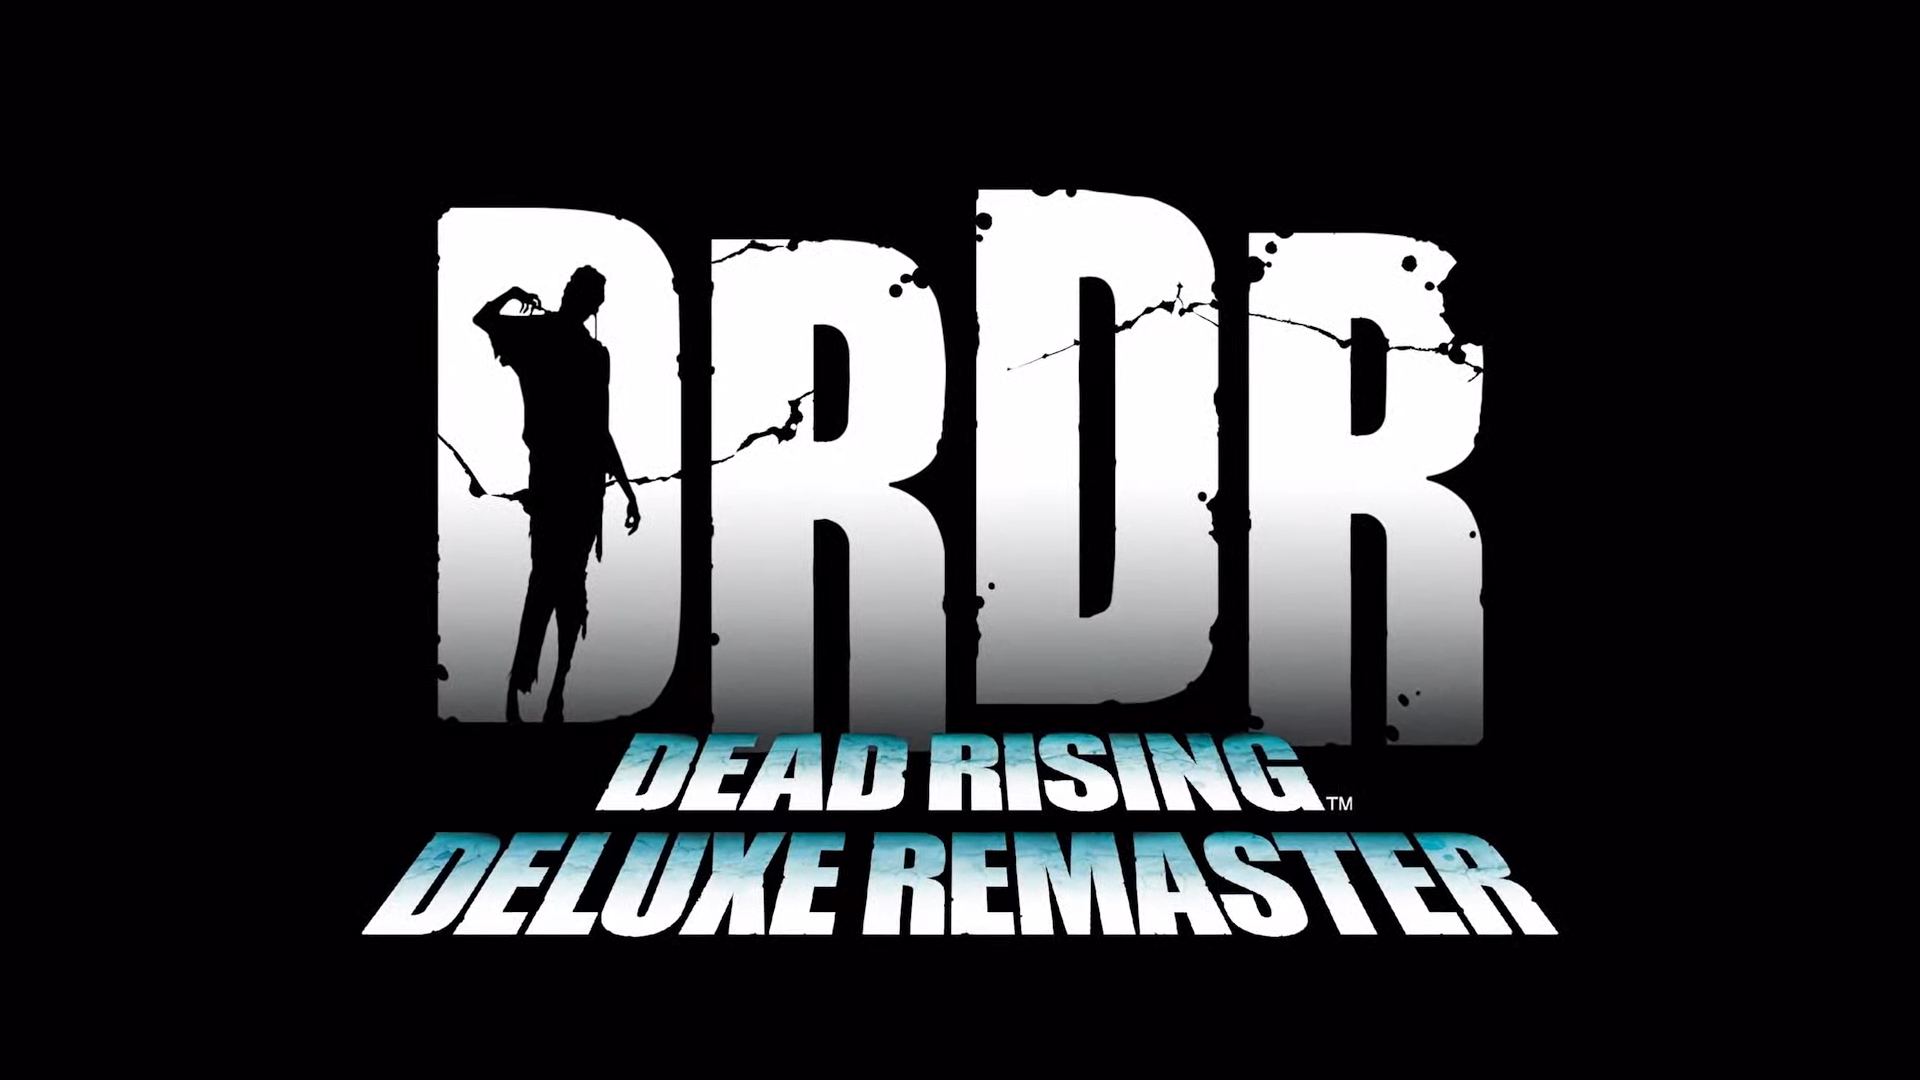 Controversial Feature Included in Dead Rising Deluxe Remaster on PC News